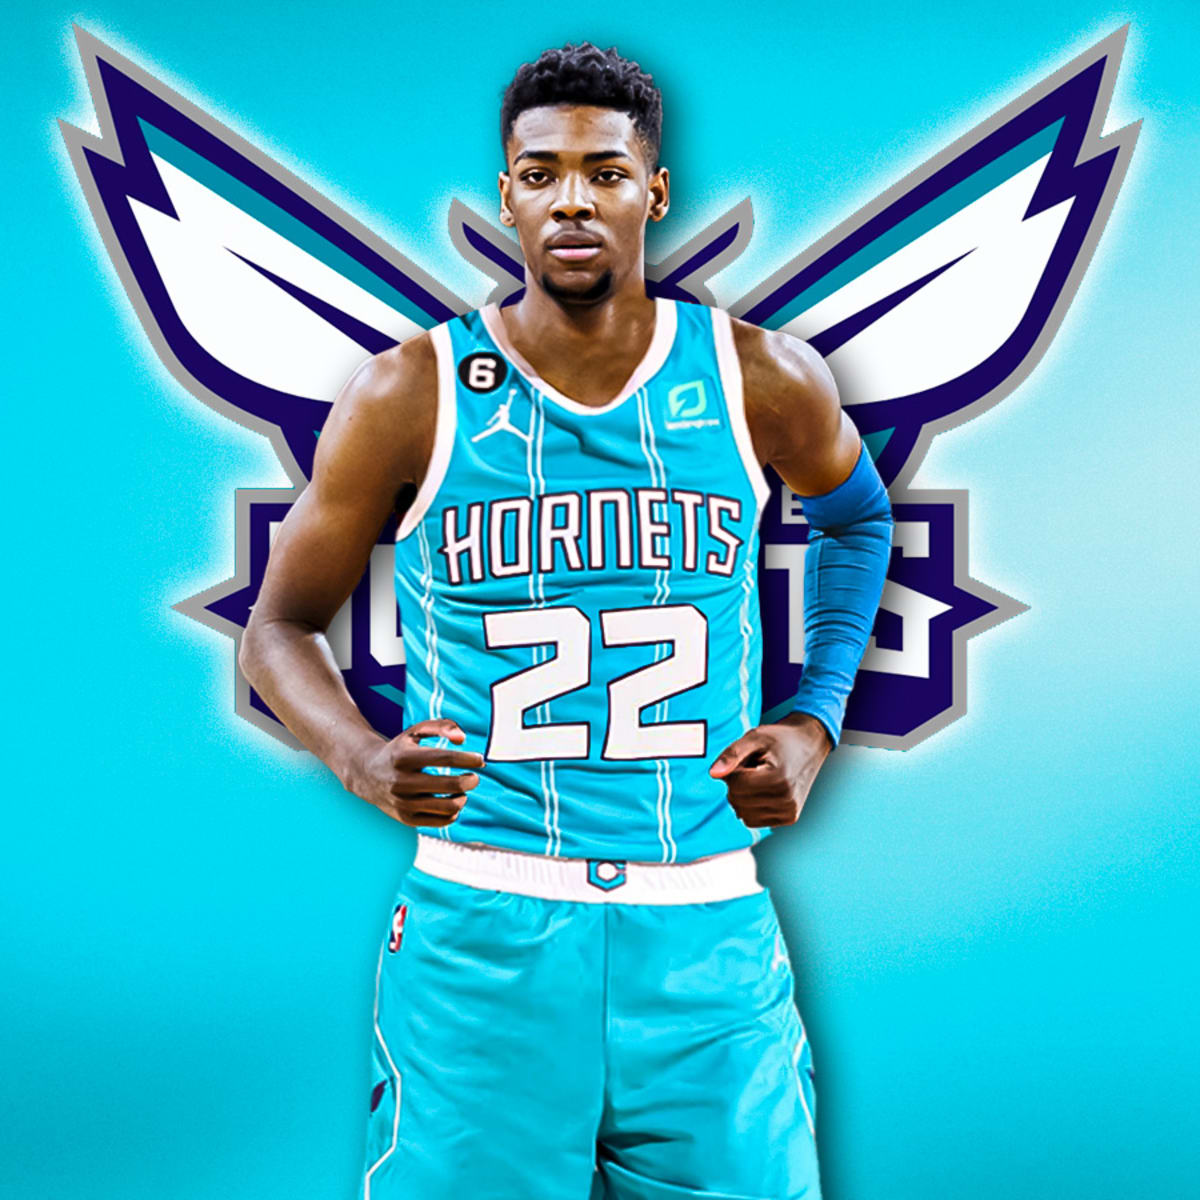 With the No. 2 pick, Brandon Miller is heading to the Hornets